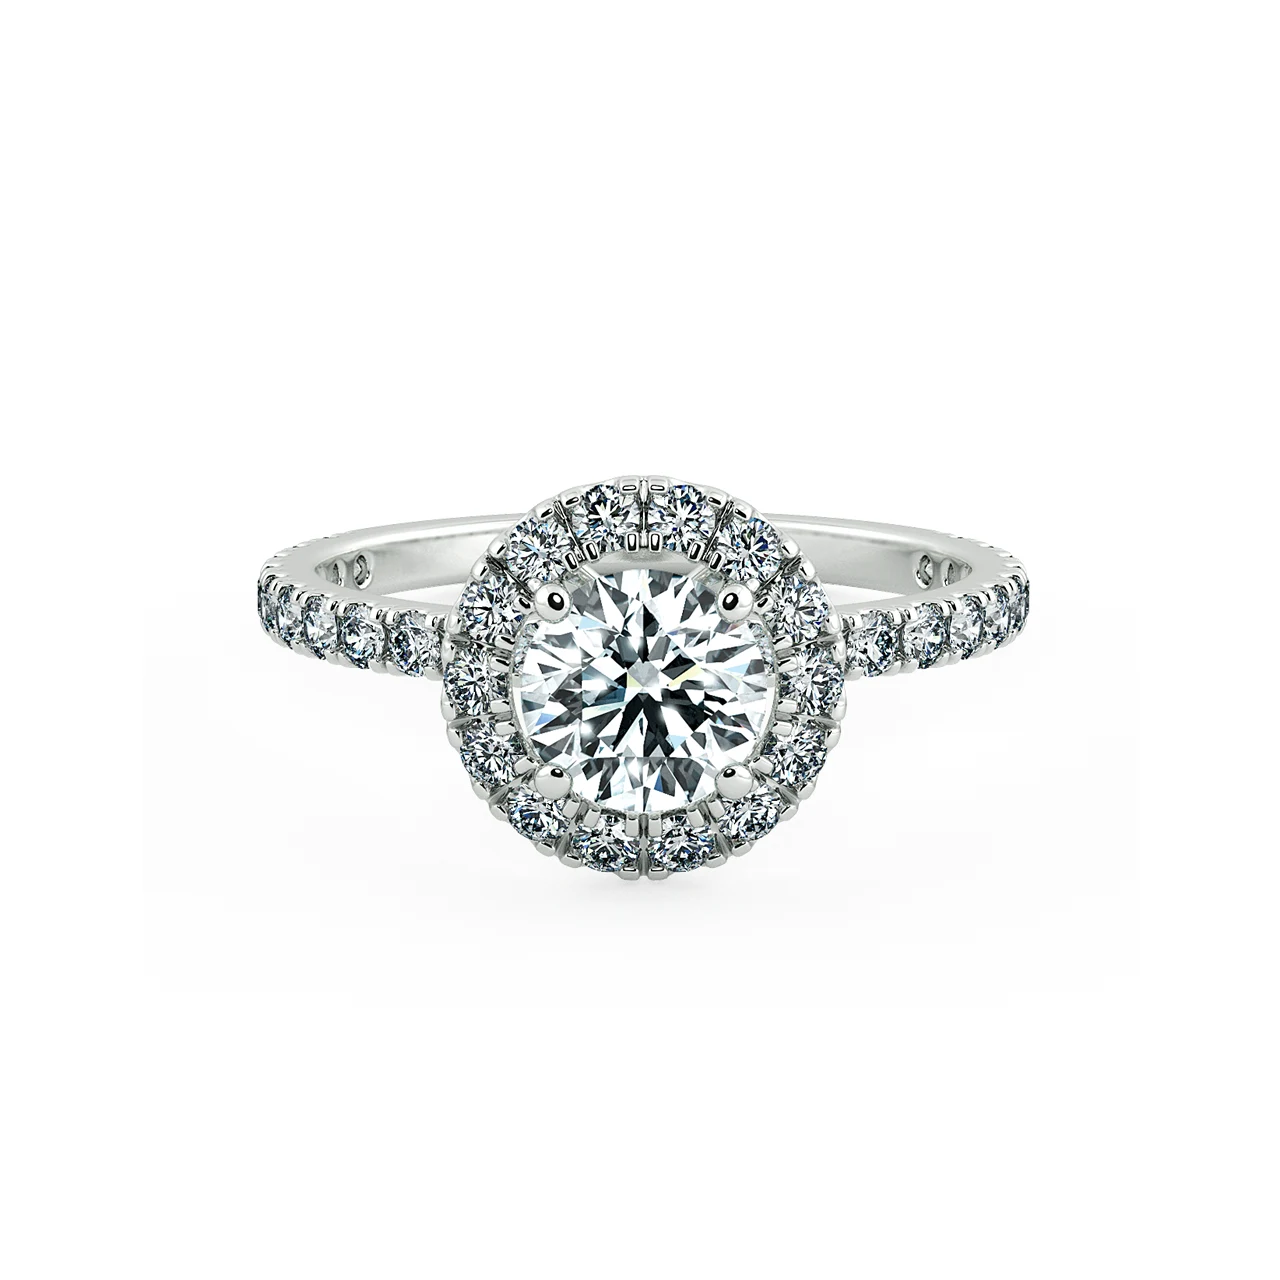 Round Halo Engagement Ring with Eternity Band NCH2201